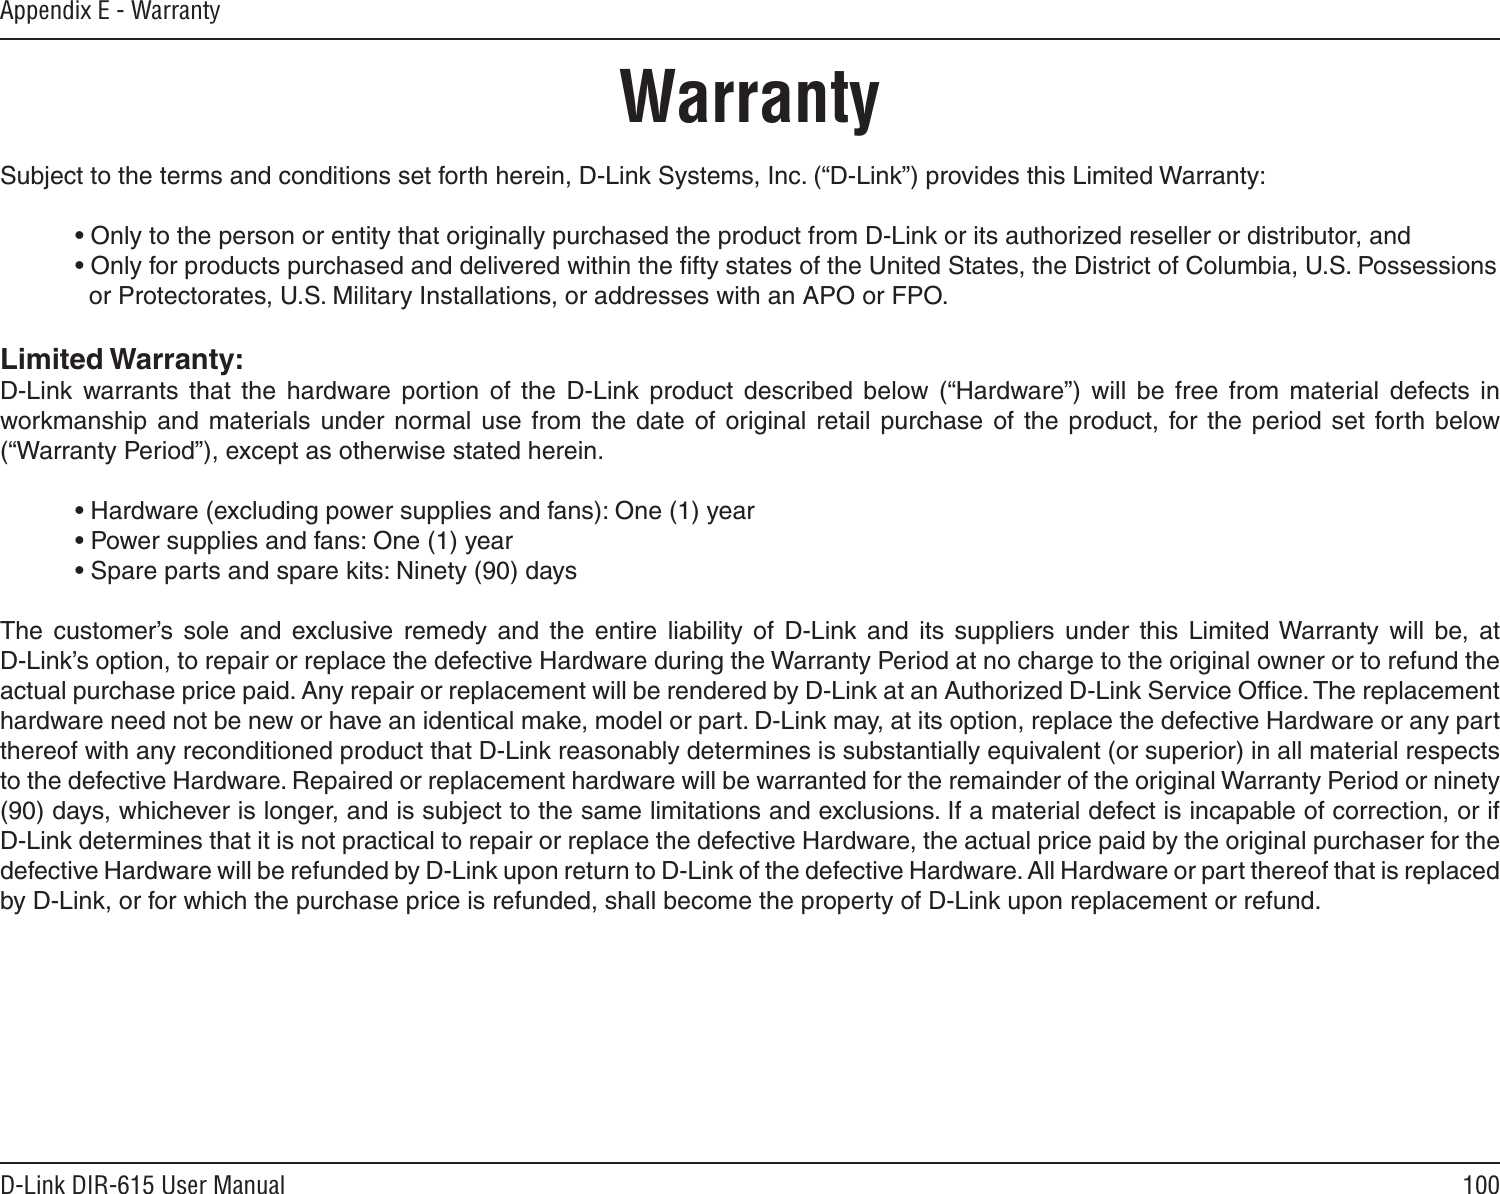 100D-Link DIR-615 User ManualAppendix E - WarrantyWarrantySubject to the terms and conditions set forth herein, D-Link Systems, Inc. (“D-Link”) provides this Limited Warranty:  • Only to the person or entity that originally purchased the product from D-Link or its authorized reseller or distributor, and  • Only for products purchased and delivered within the ﬁfty states of the United States, the District of Columbia, U.S. Possessions      or Protectorates, U.S. Military Installations, or addresses with an APO or FPO.Limited Warranty:D-Link  warrants  that  the  hardware  portion  of  the  D-Link  product  described  below  (“Hardware”)  will  be  free  from  material  defects  in workmanship  and materials  under normal  use  from the date  of  original  retail  purchase of the product,  for  the period  set forth  below (“Warranty Period”), except as otherwise stated herein.  • Hardware (excluding power supplies and fans): One (1) year  • Power supplies and fans: One (1) year  • Spare parts and spare kits: Ninety (90) daysThe  customer’s  sole  and  exclusive  remedy  and  the  entire  liability  of  D-Link  and  its  suppliers  under  this  Limited Warranty  will  be,  at  D-Link’s option, to repair or replace the defective Hardware during the Warranty Period at no charge to the original owner or to refund the actual purchase price paid. Any repair or replacement will be rendered by D-Link at an Authorized D-Link Service Ofﬁce. The replacement hardware need not be new or have an identical make, model or part. D-Link may, at its option, replace the defective Hardware or any part thereof with any reconditioned product that D-Link reasonably determines is substantially equivalent (or superior) in all material respects to the defective Hardware. Repaired or replacement hardware will be warranted for the remainder of the original Warranty Period or ninety (90) days, whichever is longer, and is subject to the same limitations and exclusions. If a material defect is incapable of correction, or if D-Link determines that it is not practical to repair or replace the defective Hardware, the actual price paid by the original purchaser for the defective Hardware will be refunded by D-Link upon return to D-Link of the defective Hardware. All Hardware or part thereof that is replaced by D-Link, or for which the purchase price is refunded, shall become the property of D-Link upon replacement or refund.